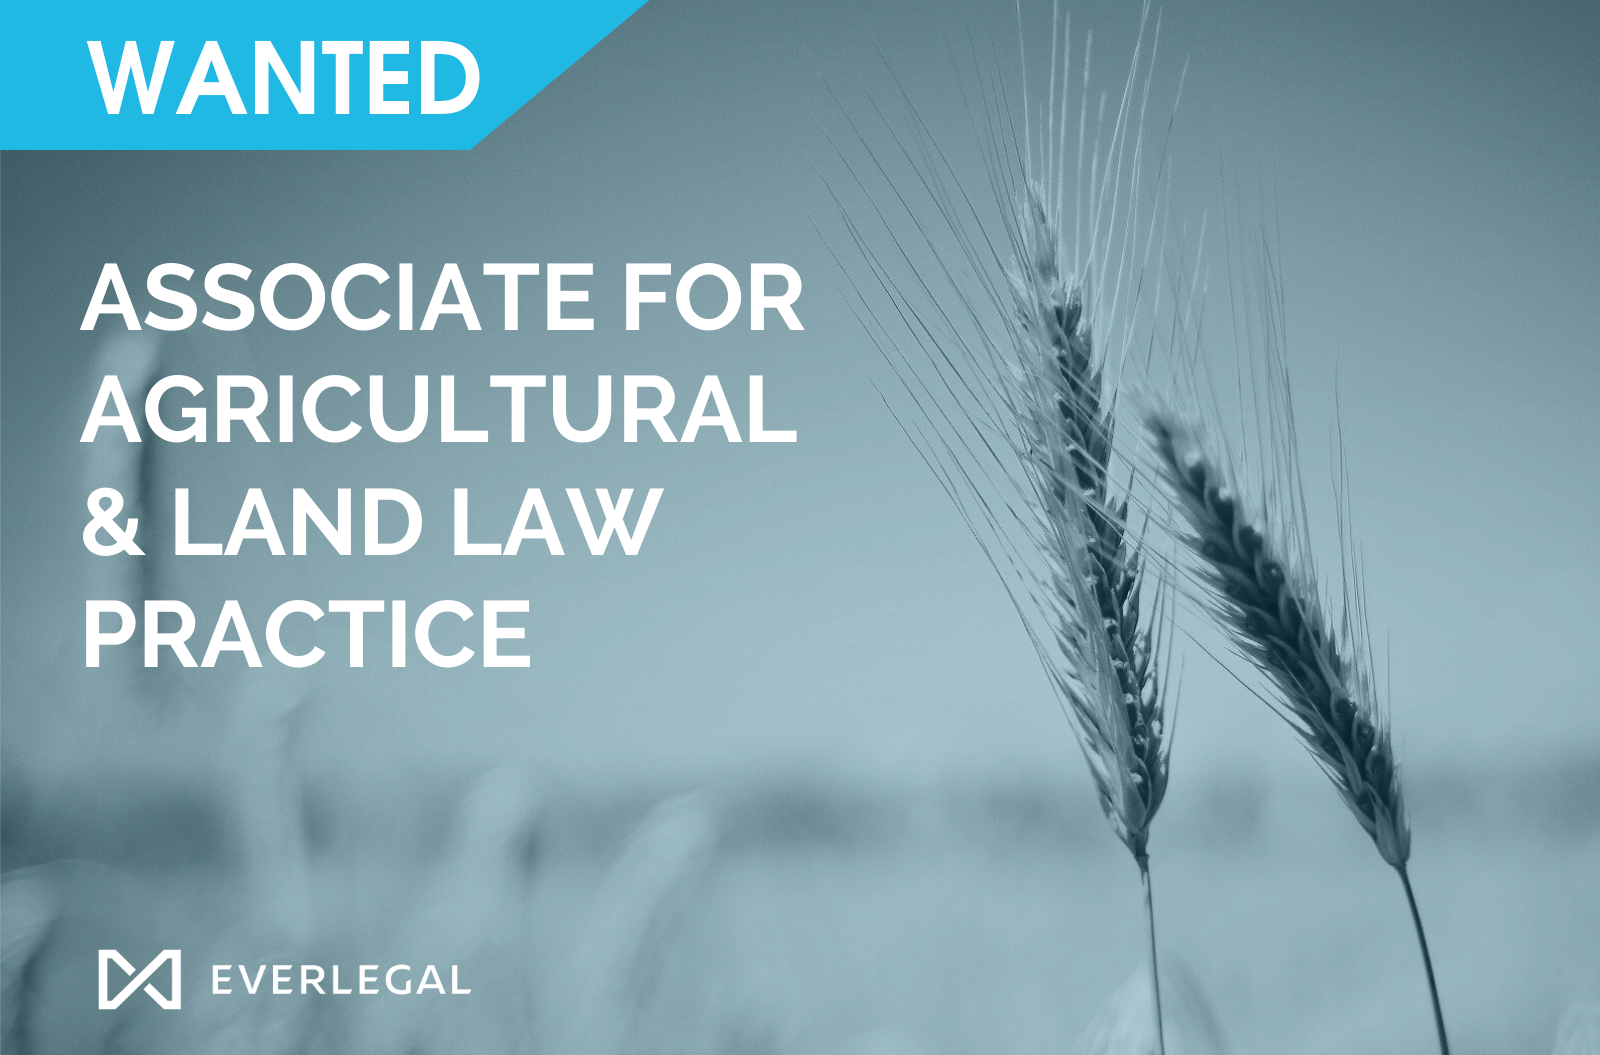 EVERLEGAL is looking for Associate for Agricultural and Land Law Practice